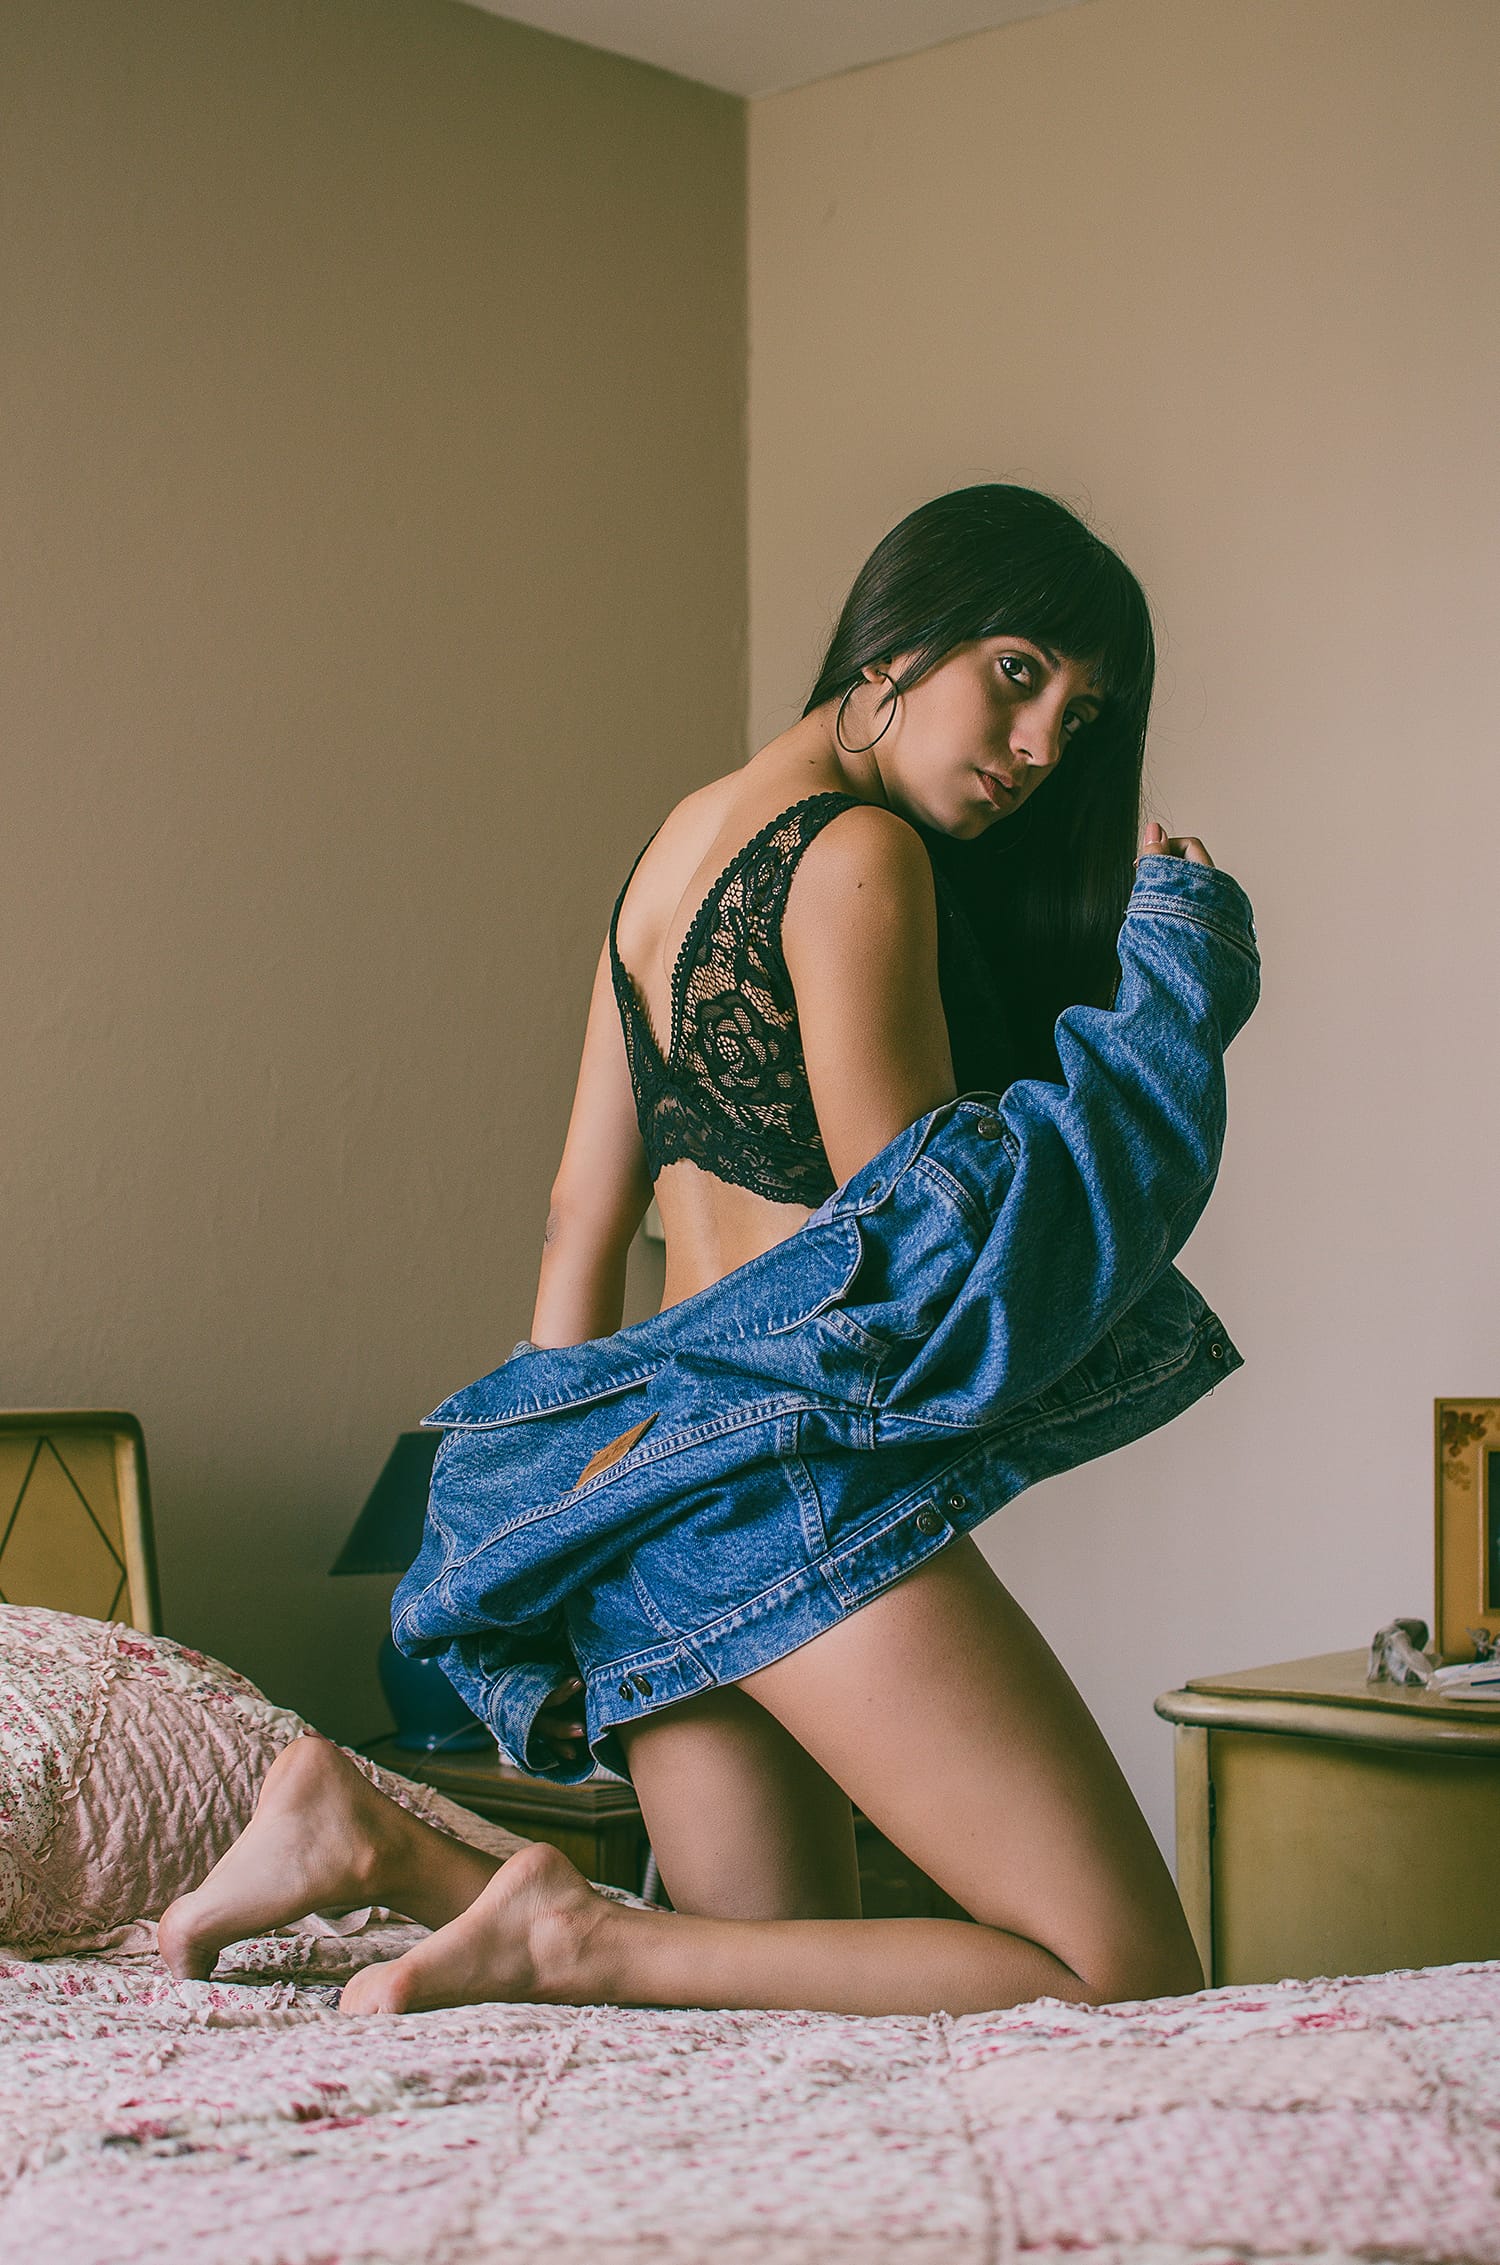 7 Tips For Capturing Gorgeous Boudoir Photos (And Making Your Client Feel Like a Million Bucks)